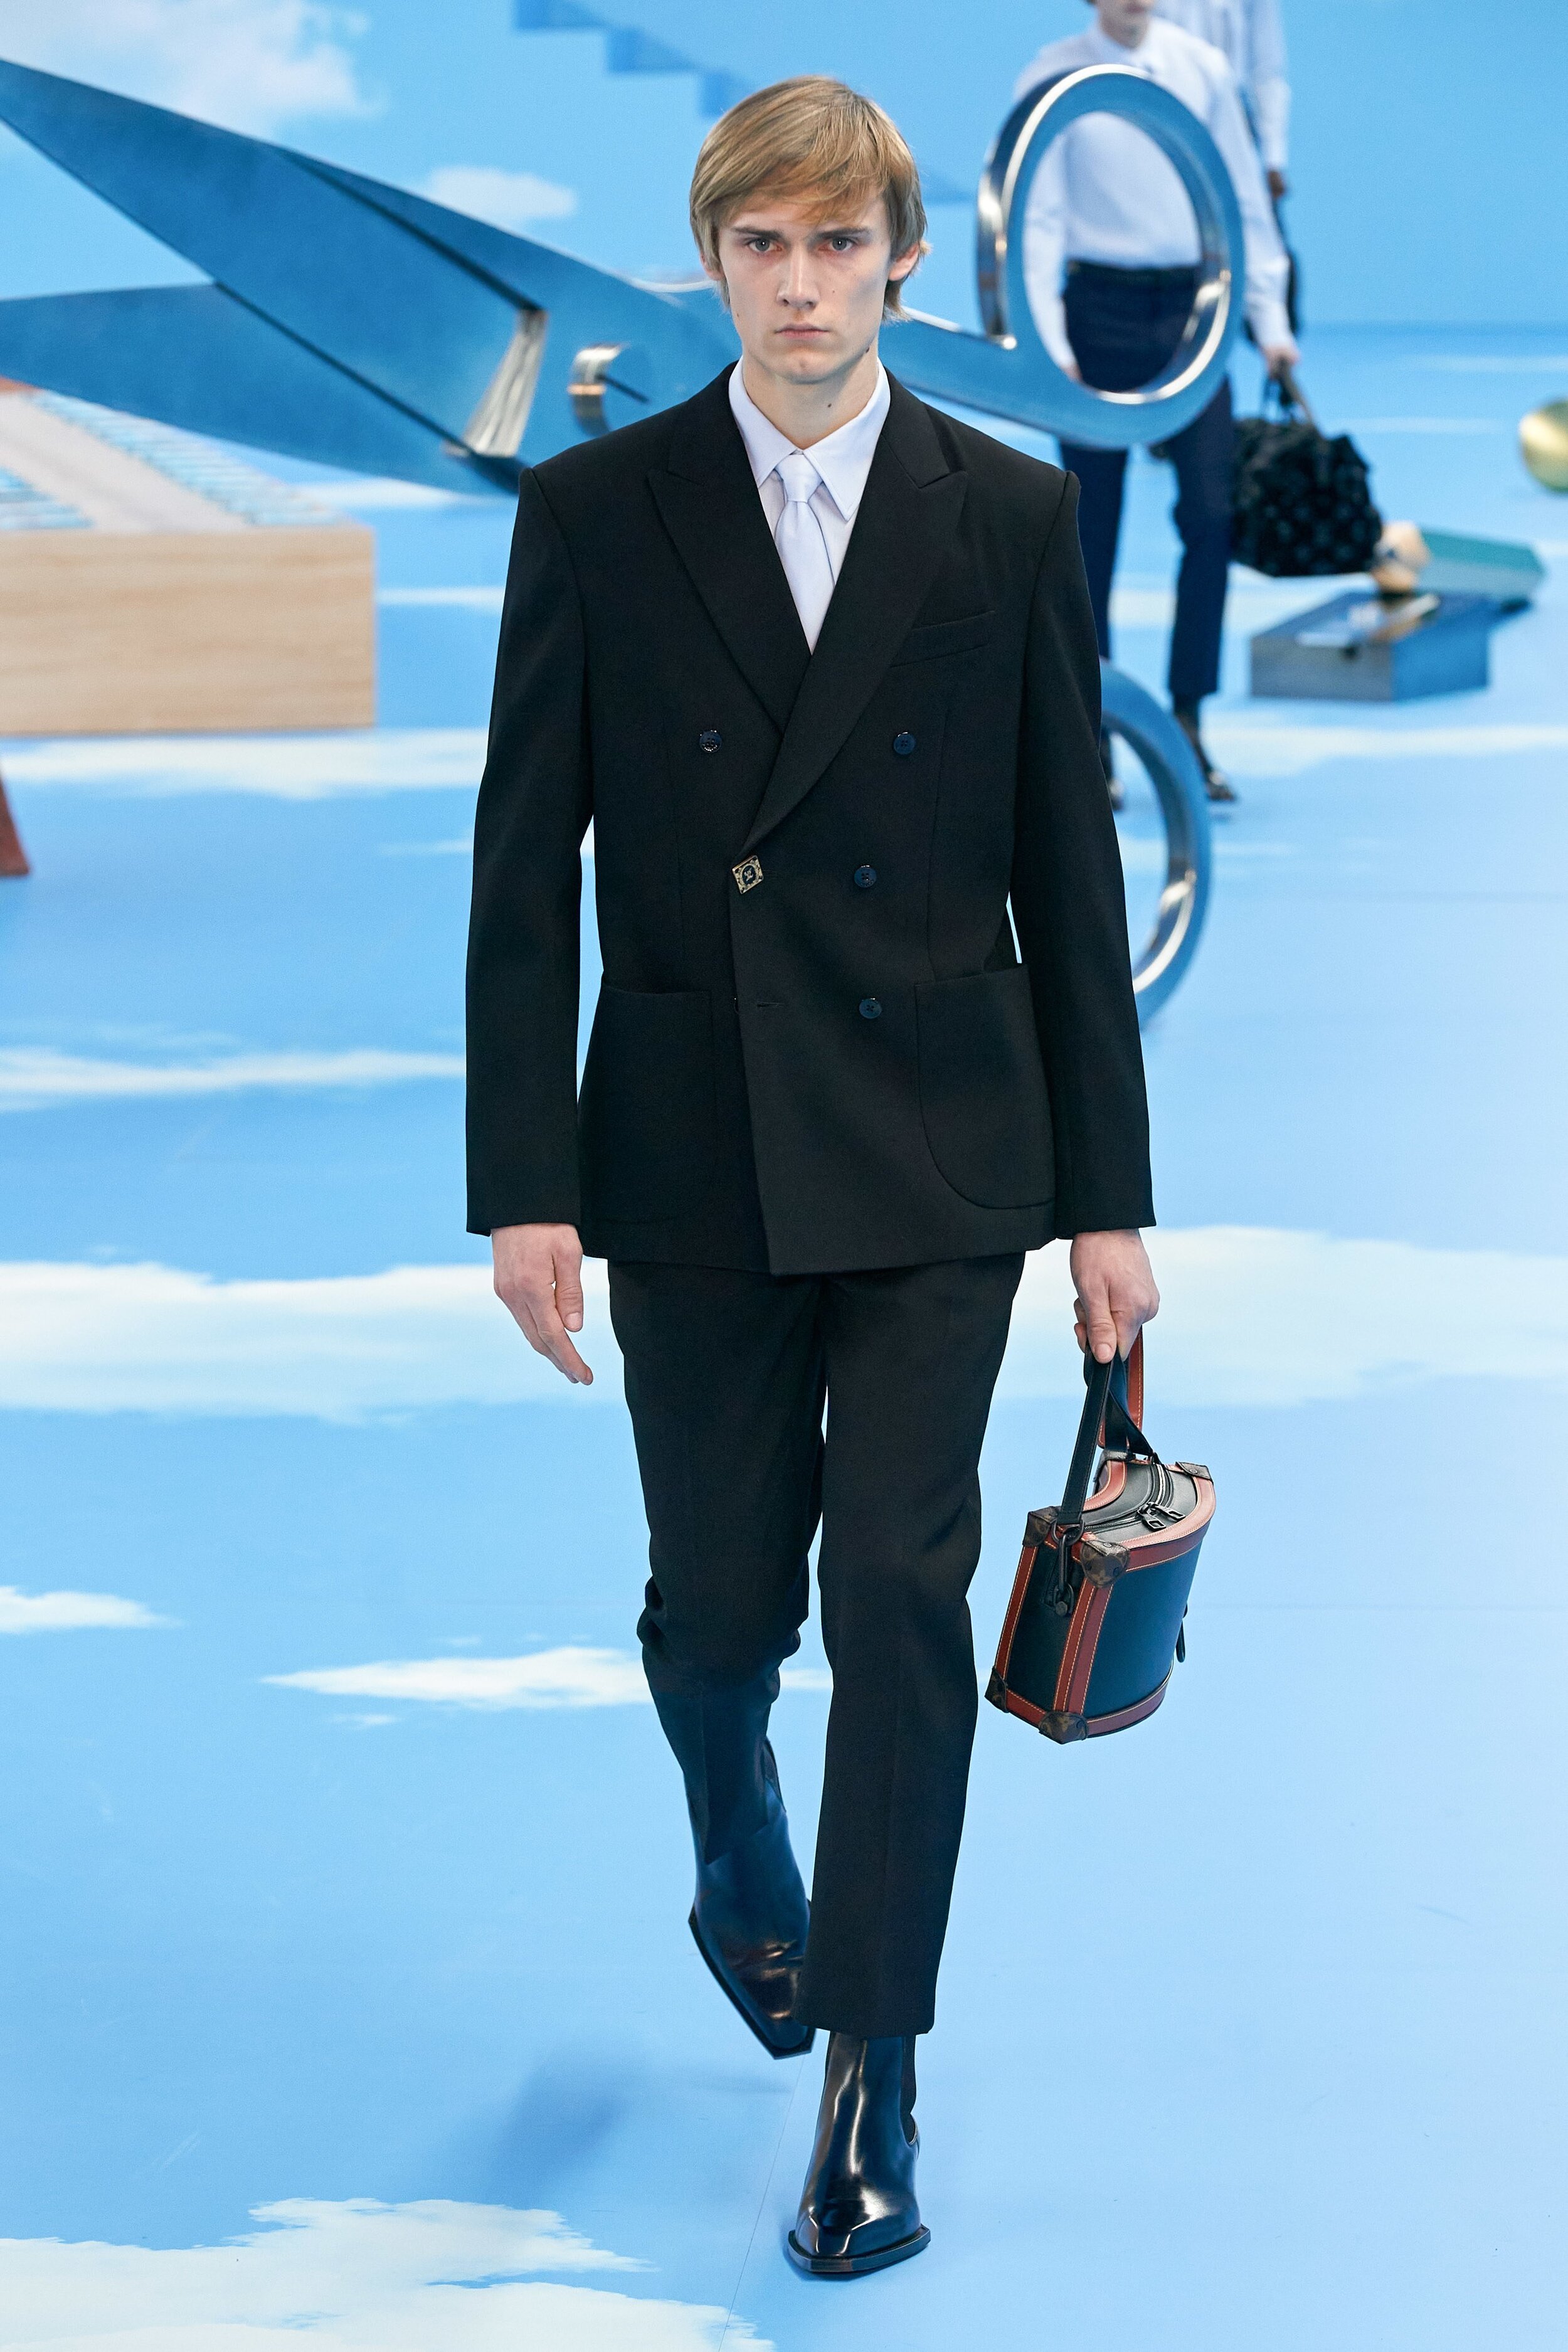 Street Style at Louis Vuitton's FW20 Show Brings All the Monograms Out